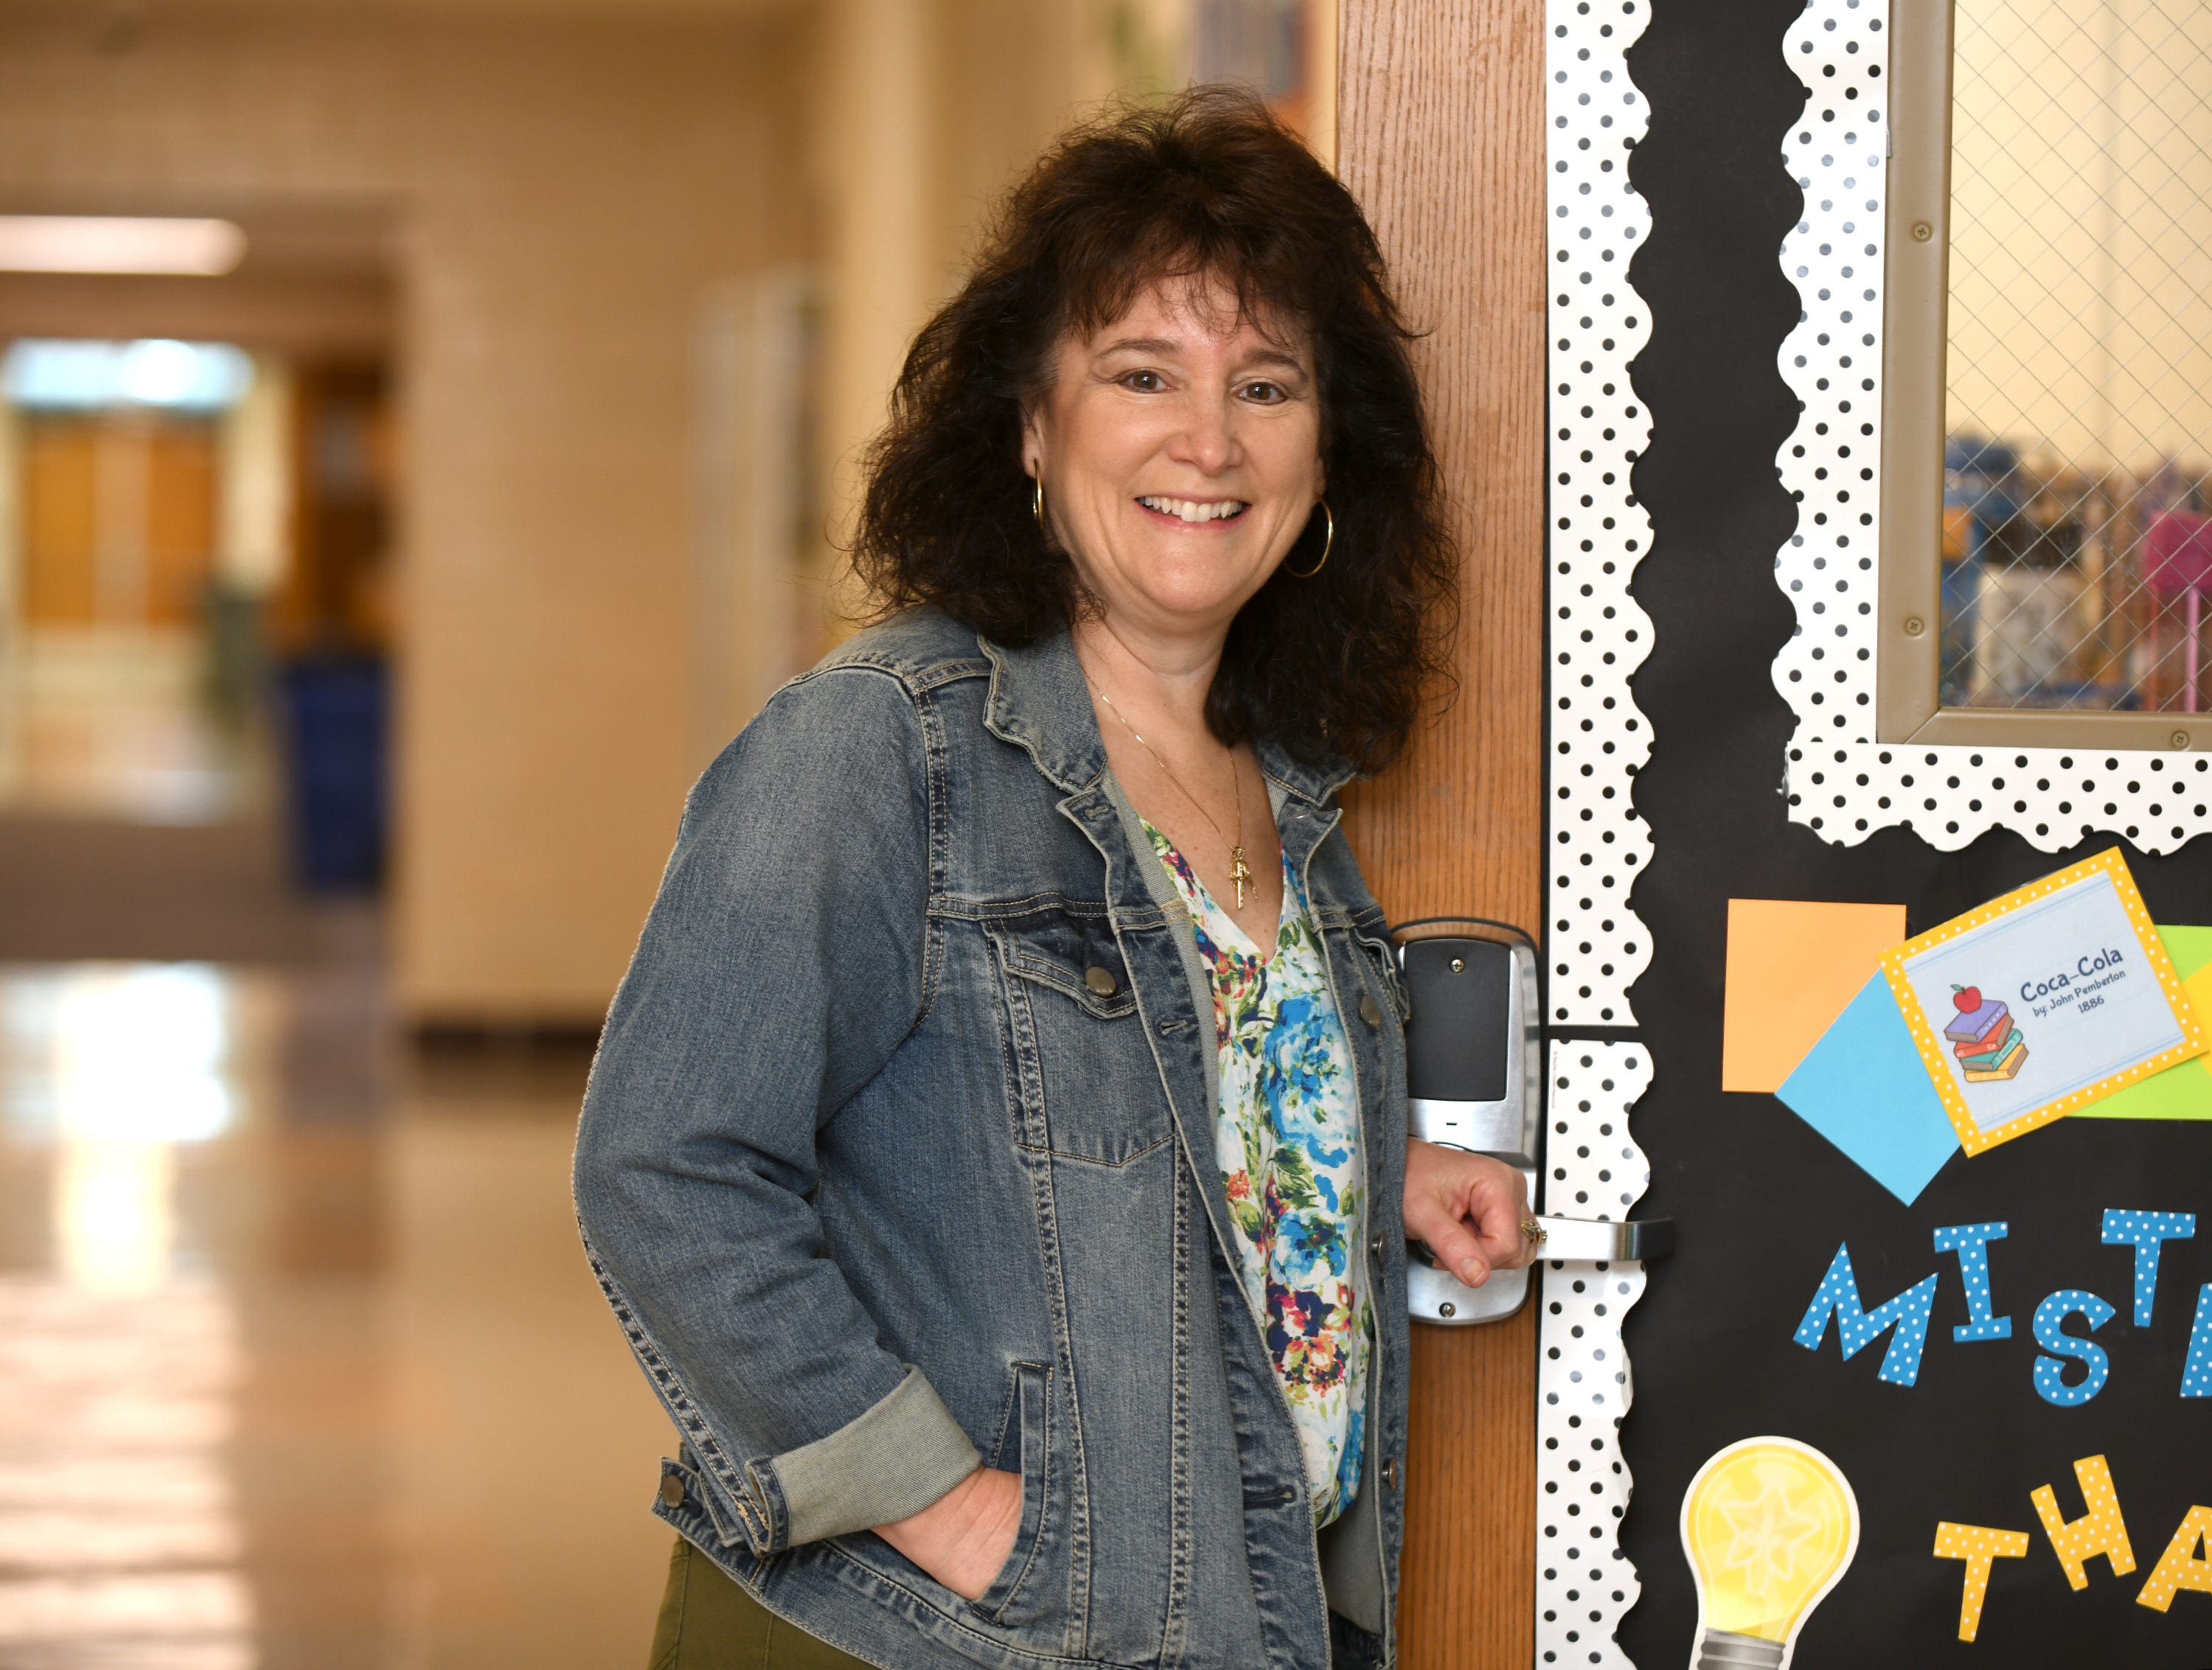 Canton Repository Teacher of the Month: Tina Miller, St. Michael School